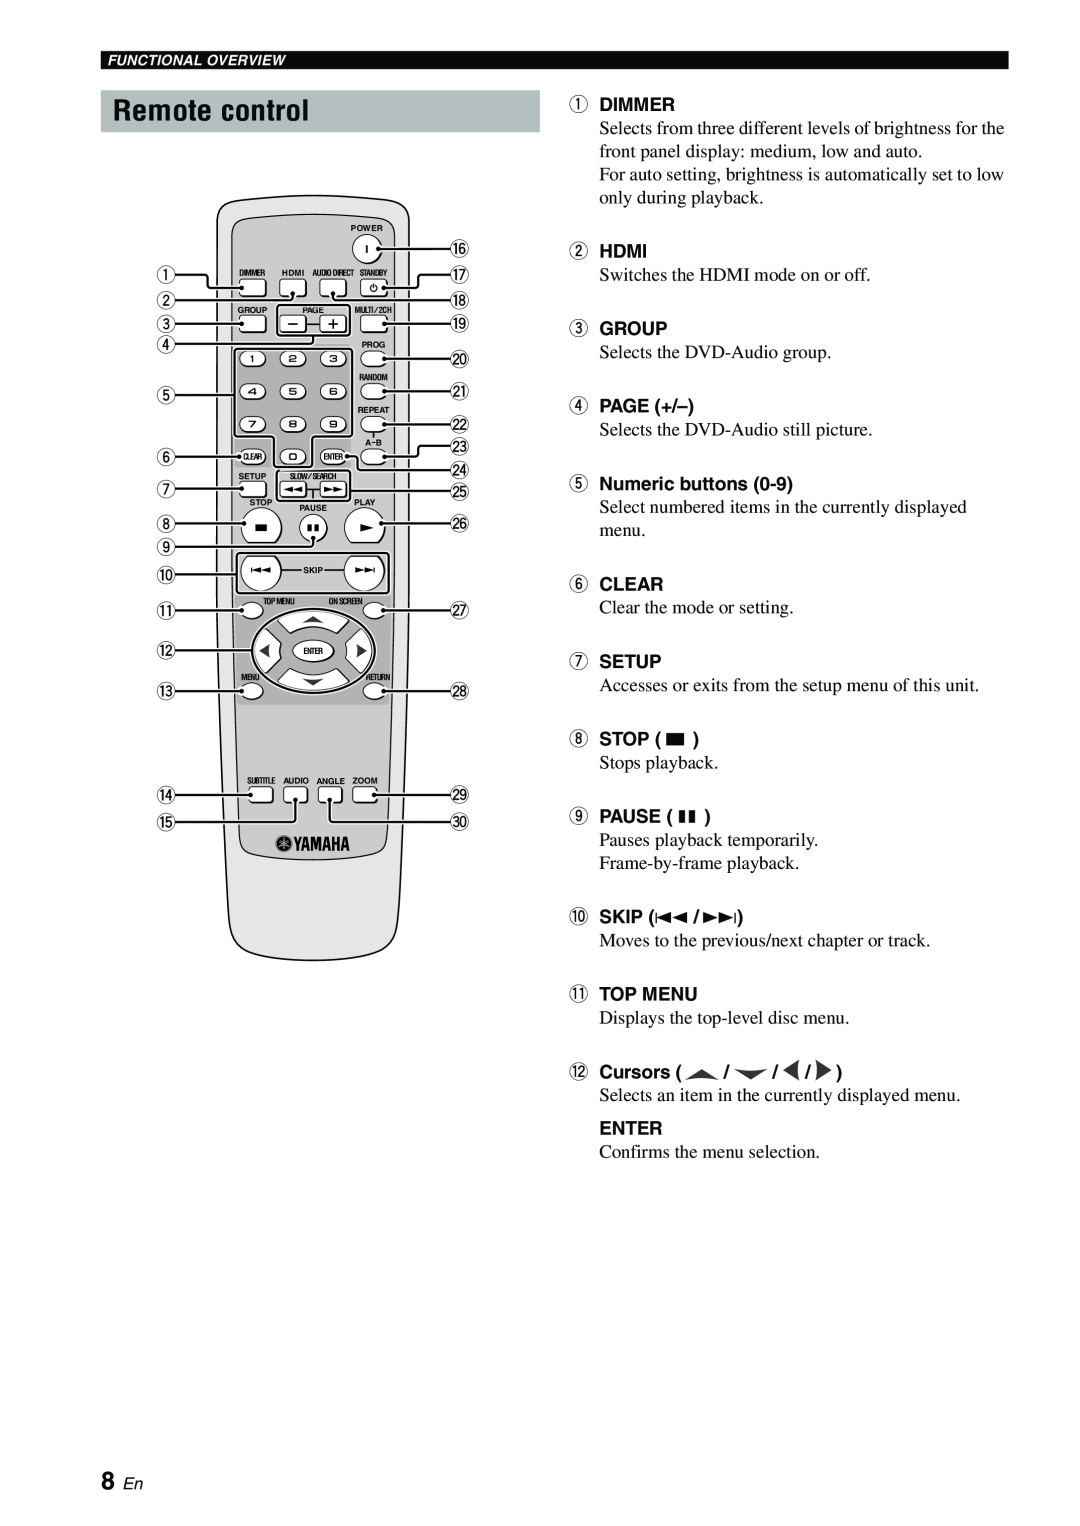 Yamaha DVD-S1700B manual Remote control, 8 En, Select numbered items in the currently displayed 